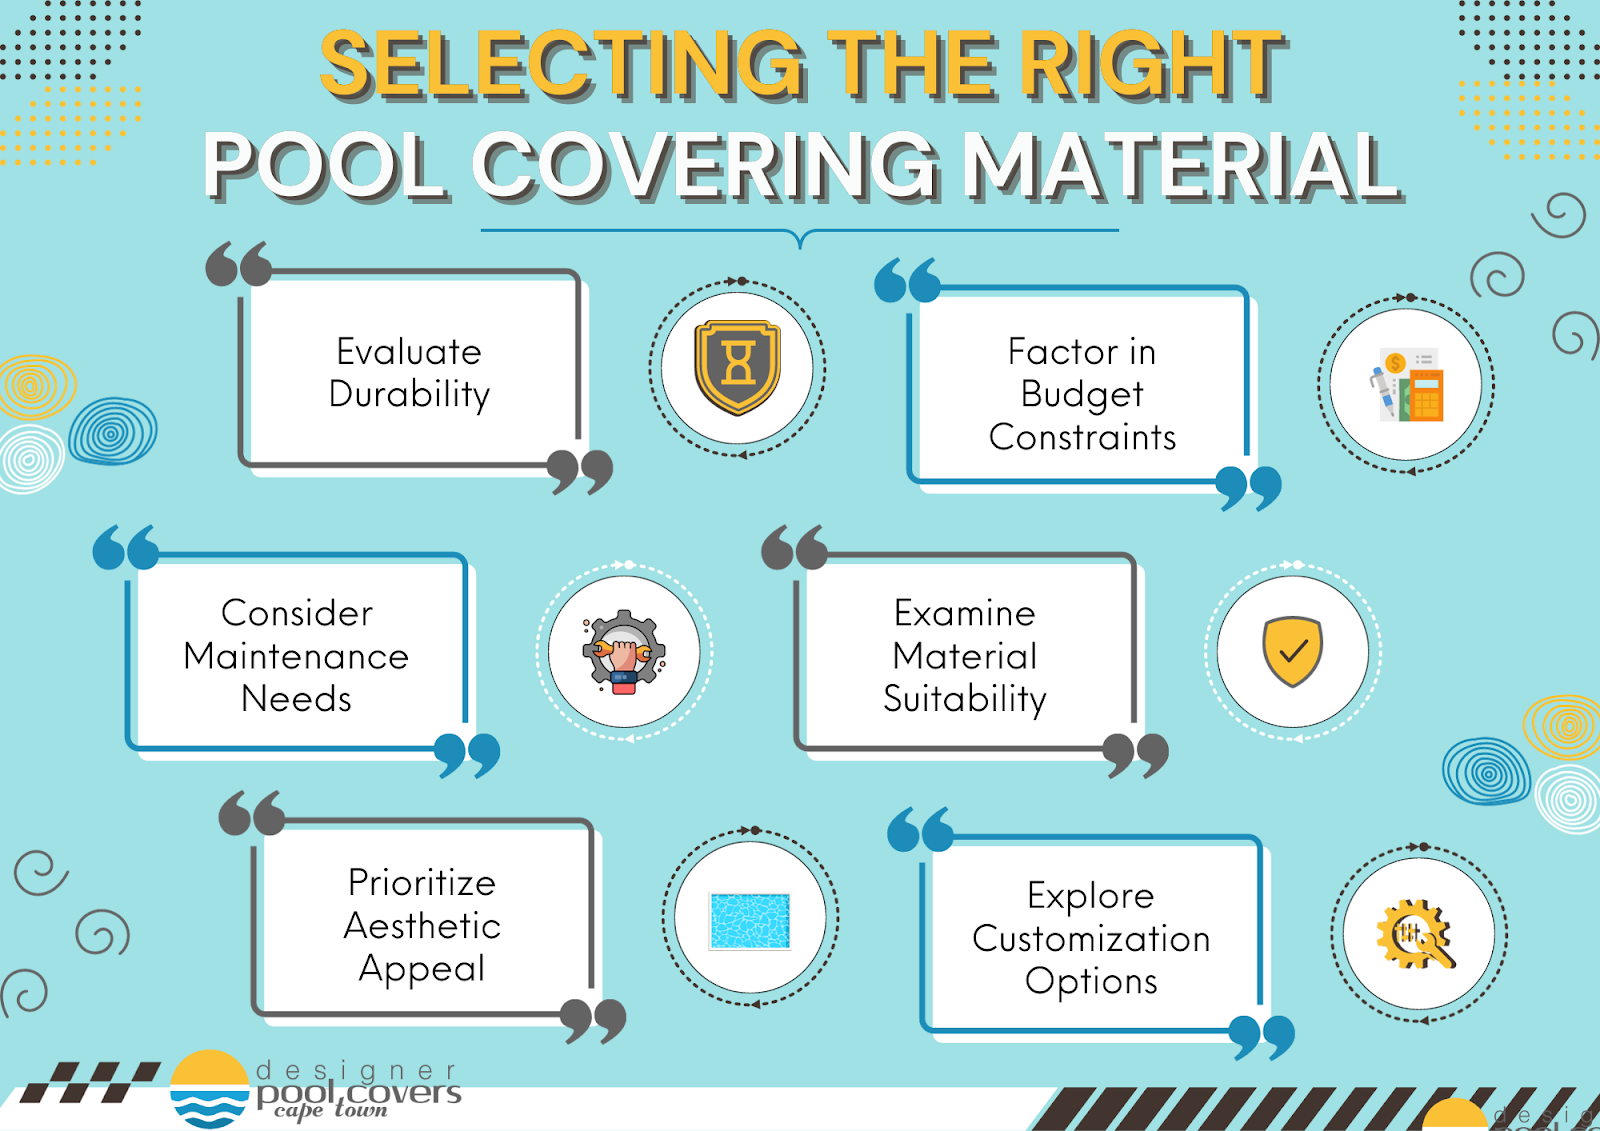 Selecting the rightCovering a Pool with a Deck pool cover material - 